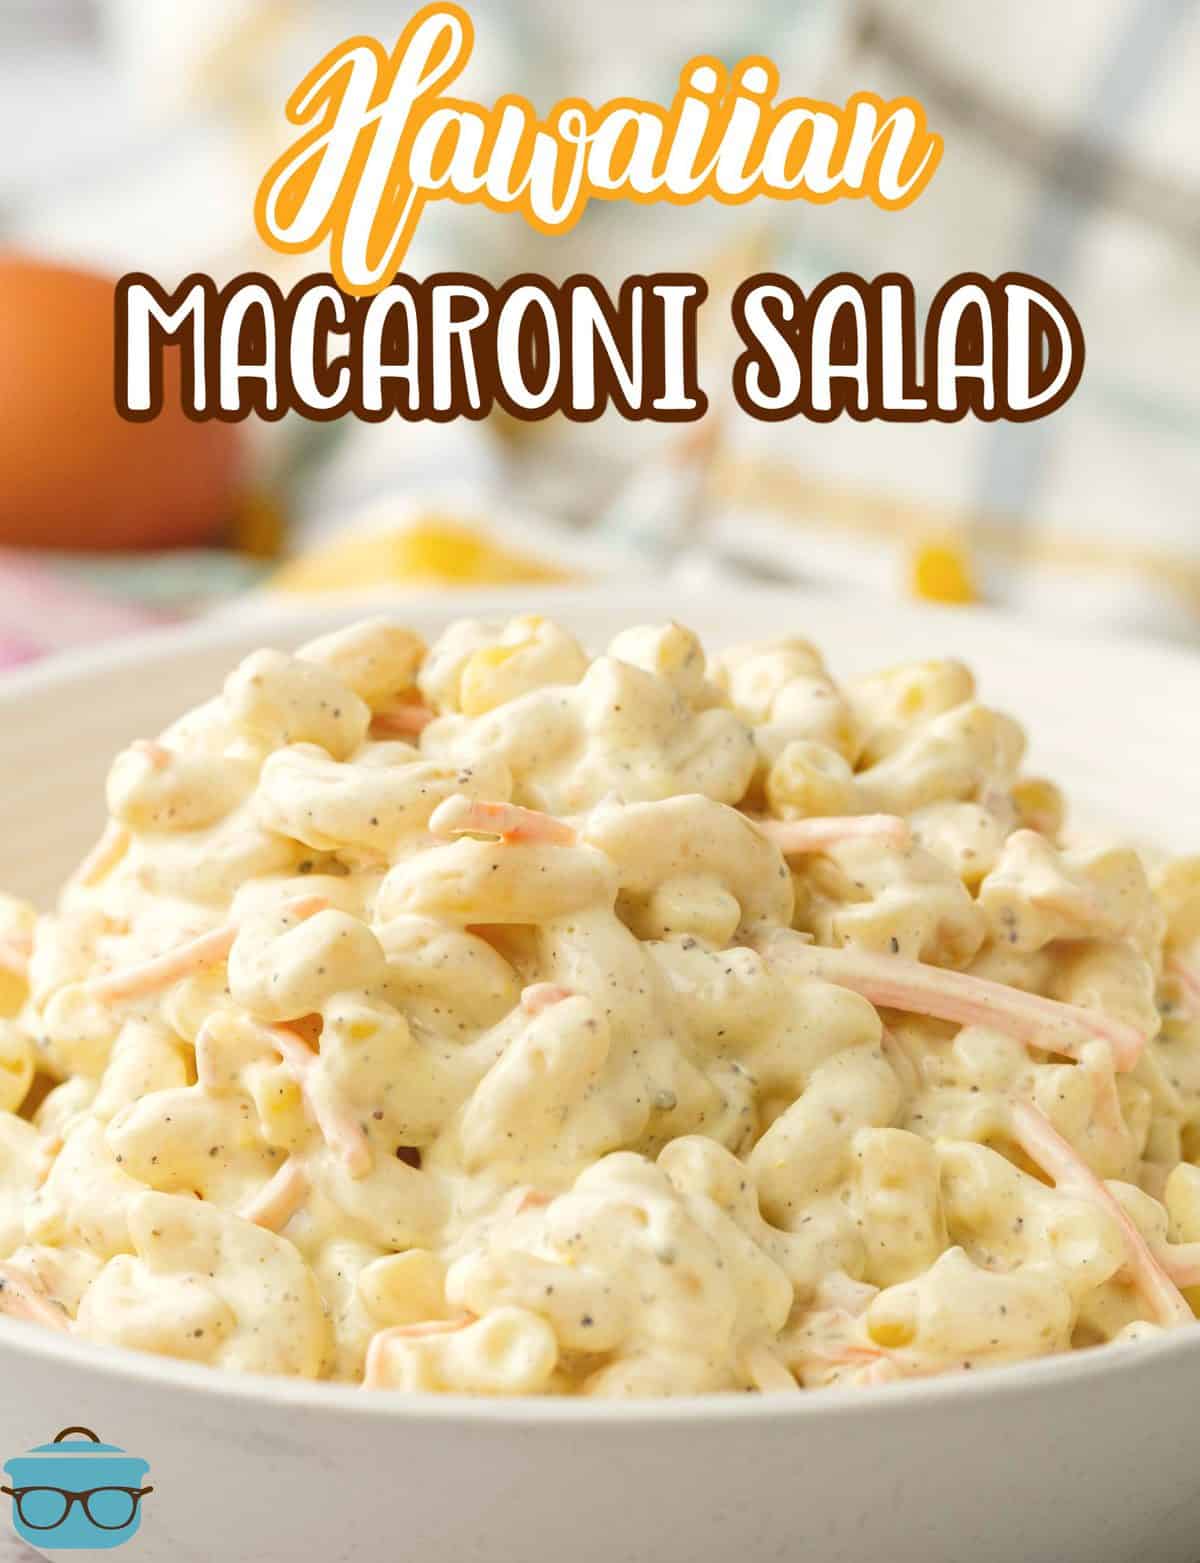 Hawaiian Macaroni Salad shown in a white bowl with a dish towel in the background.